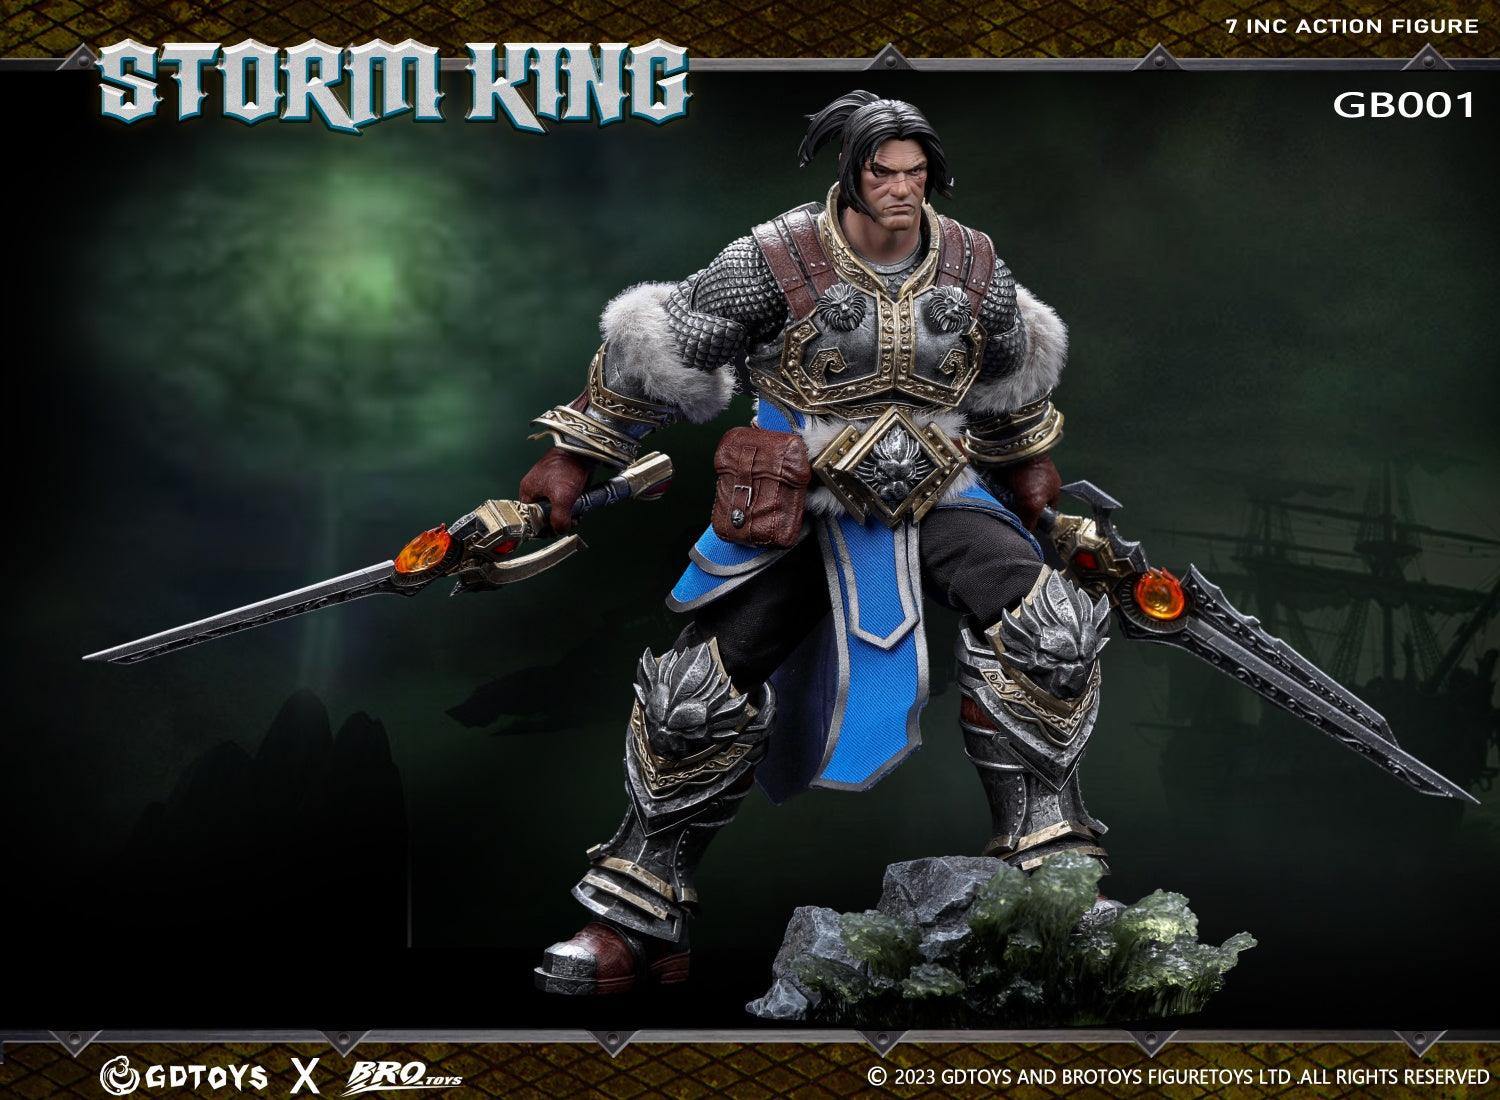 GD Toys - 1:10 Storm King Action Figure